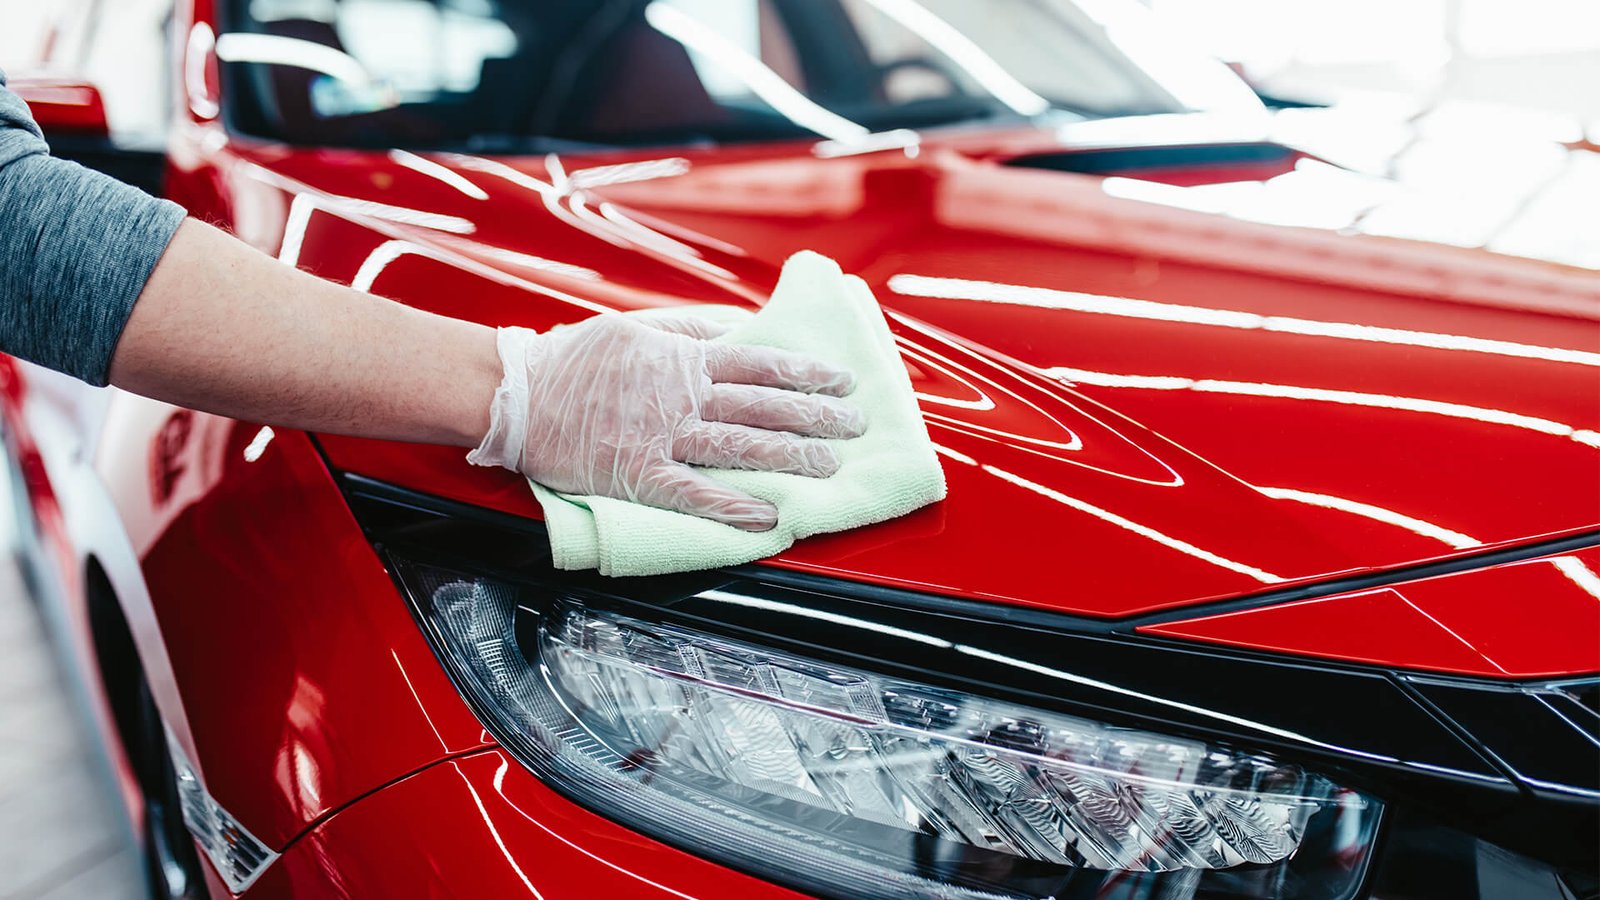 What Are the Major Reasons to Use a Concierge Car Wash Service?